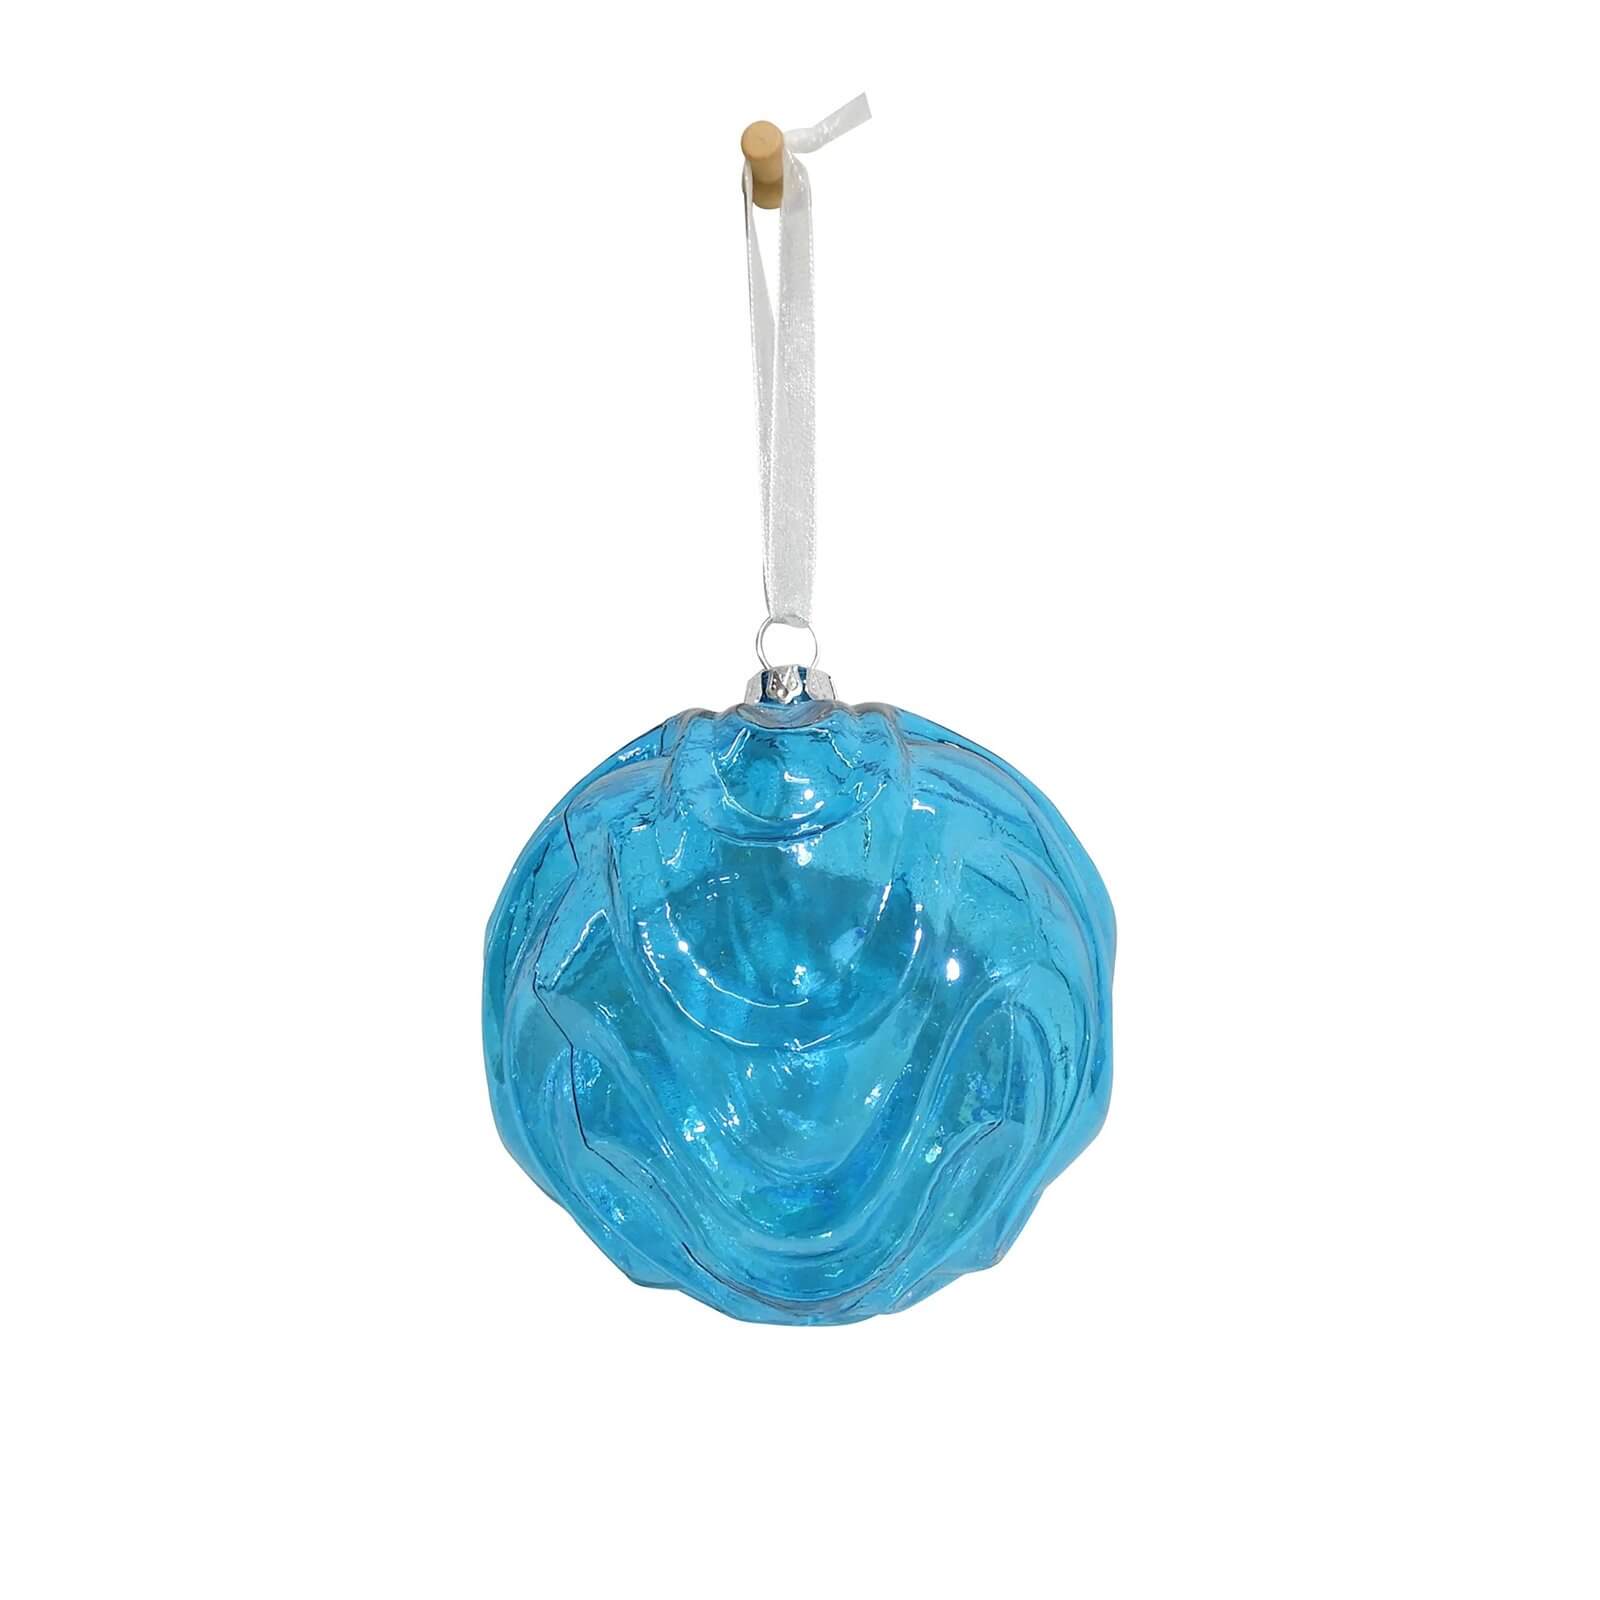 Turquoise Textured Glass Christmas Tree Bauble